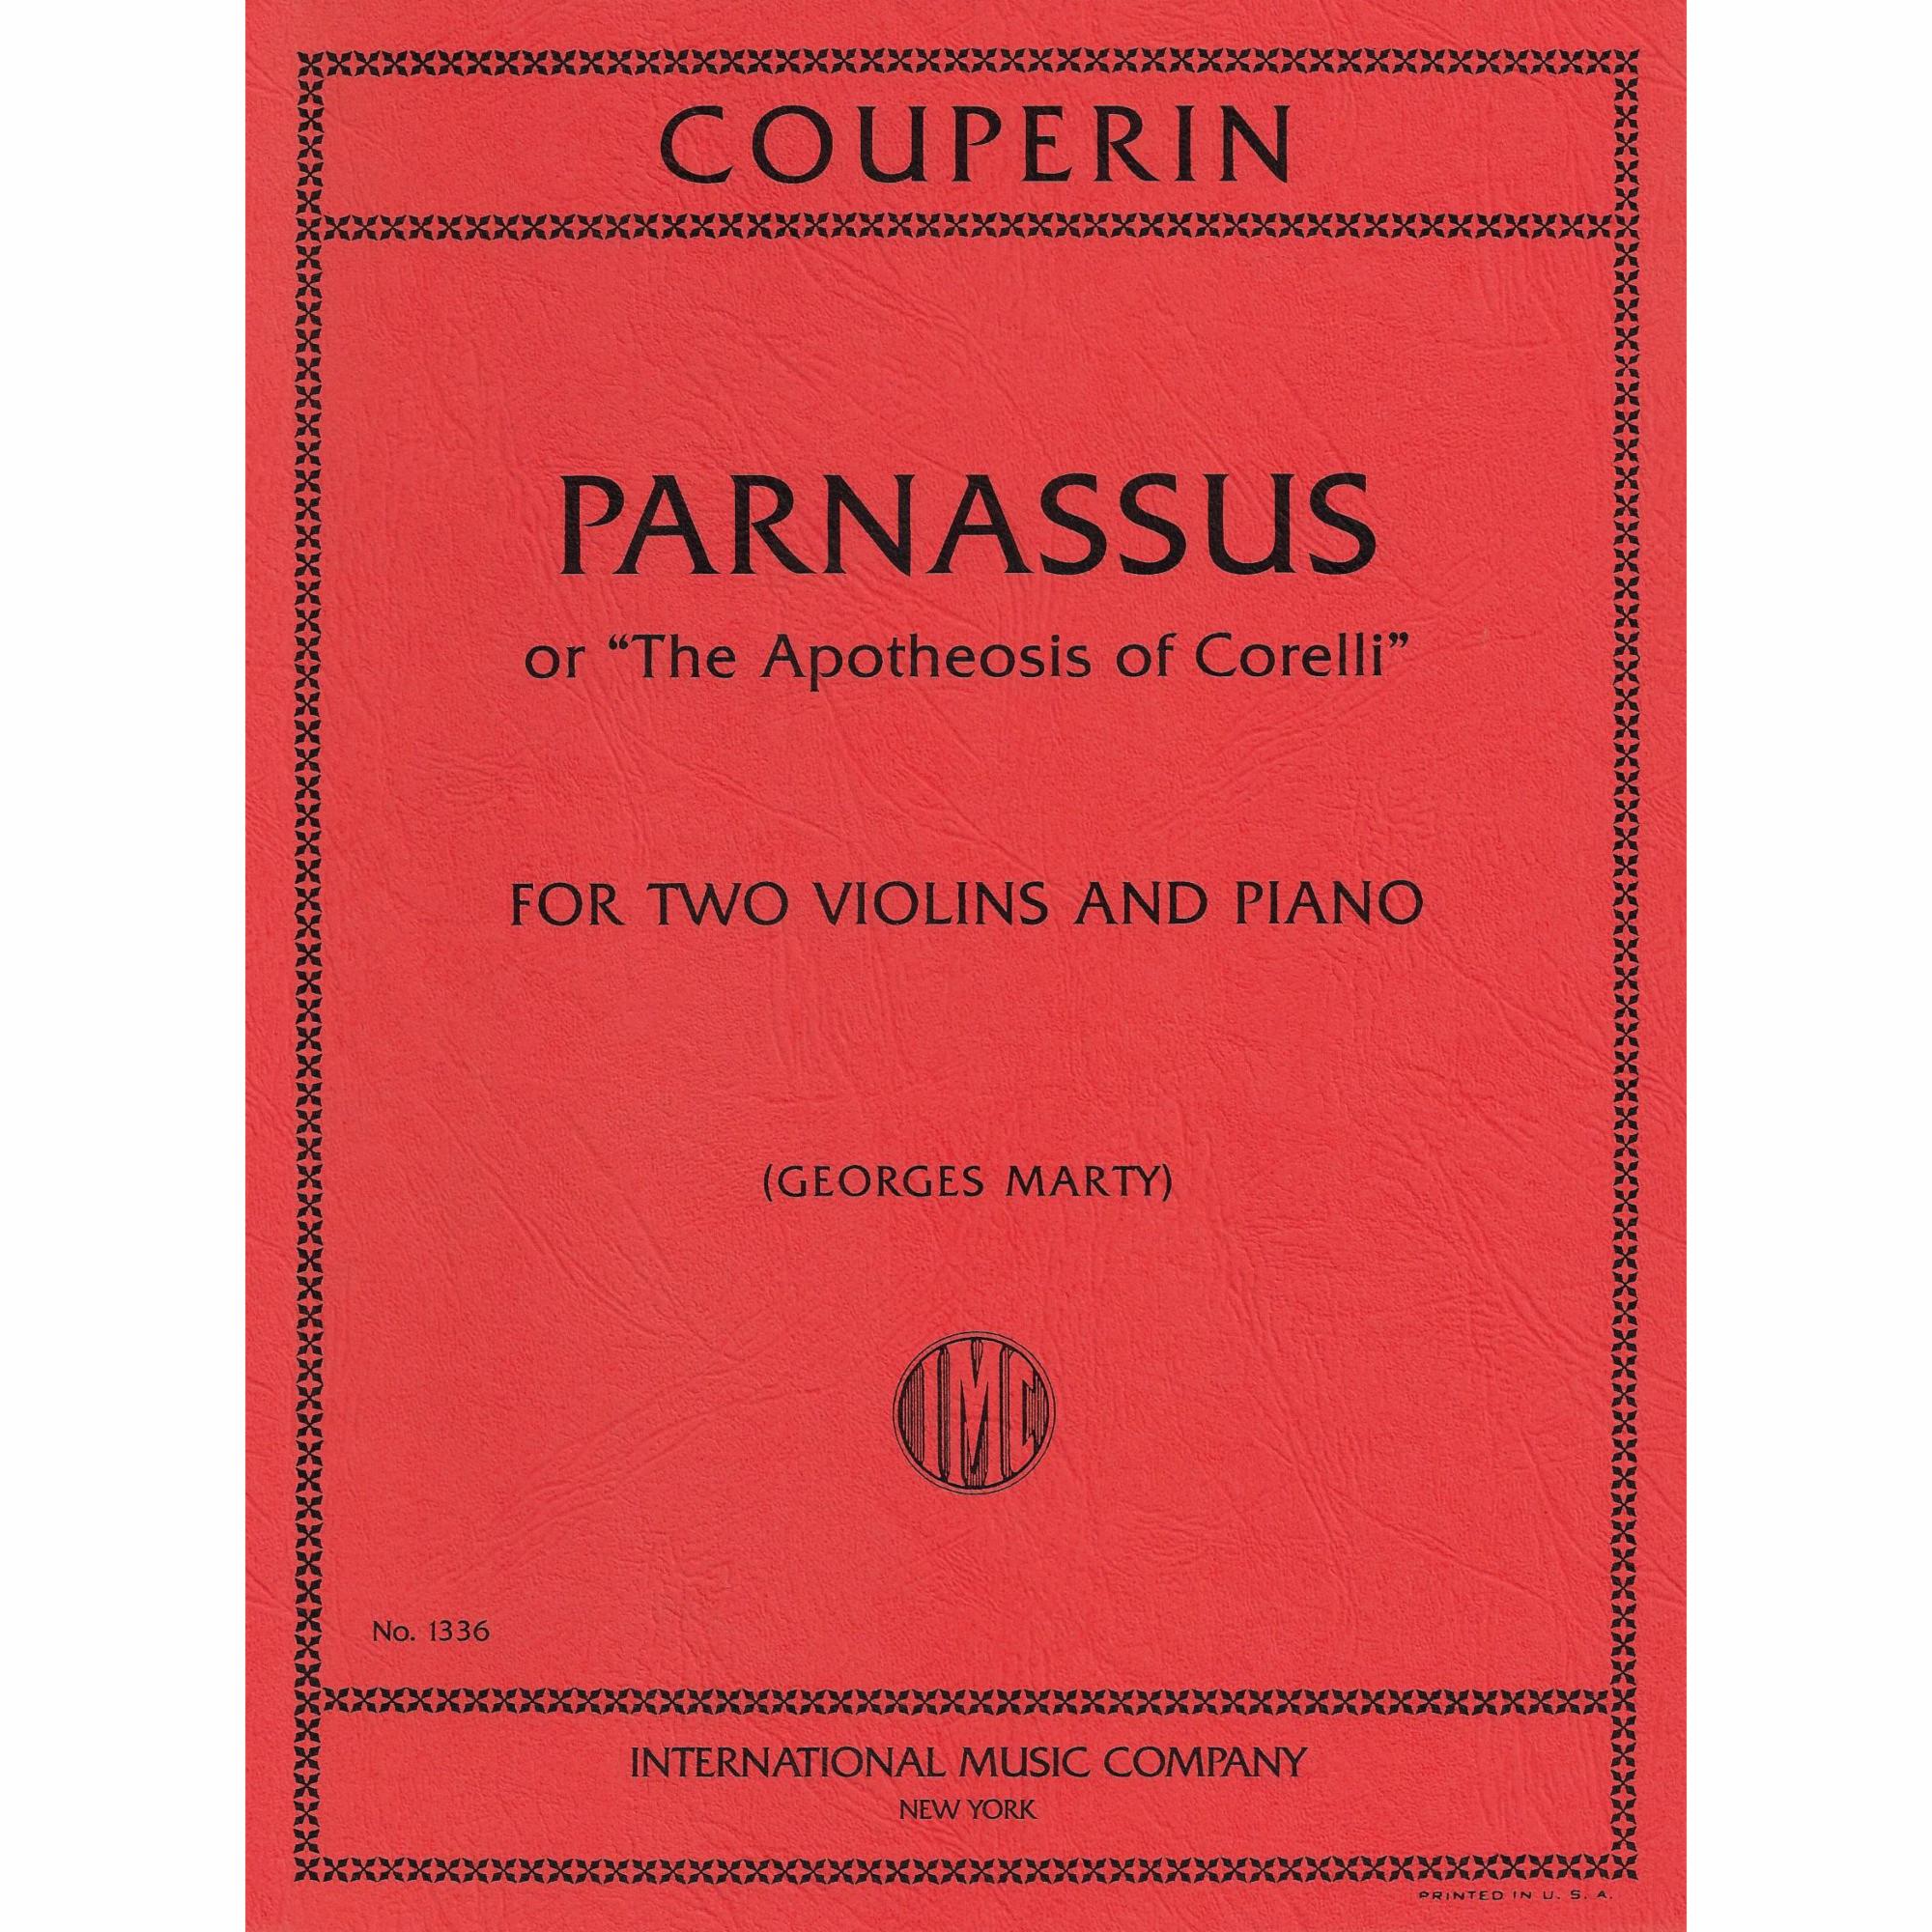 Couperin -- Parnassus, or The Apotheosis of Corelli for Two Violins and Piano